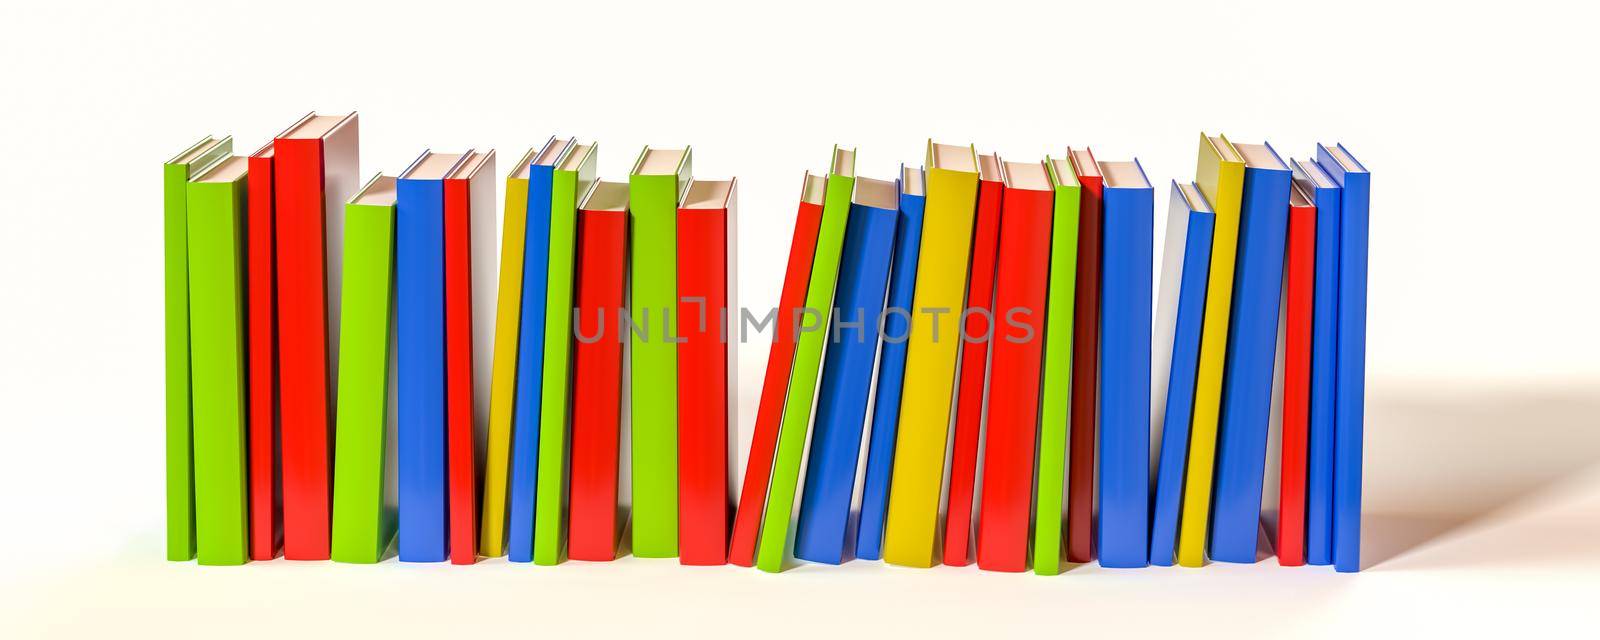 Colorful books are stacked in a row on a white background, 3D rendering illustration.